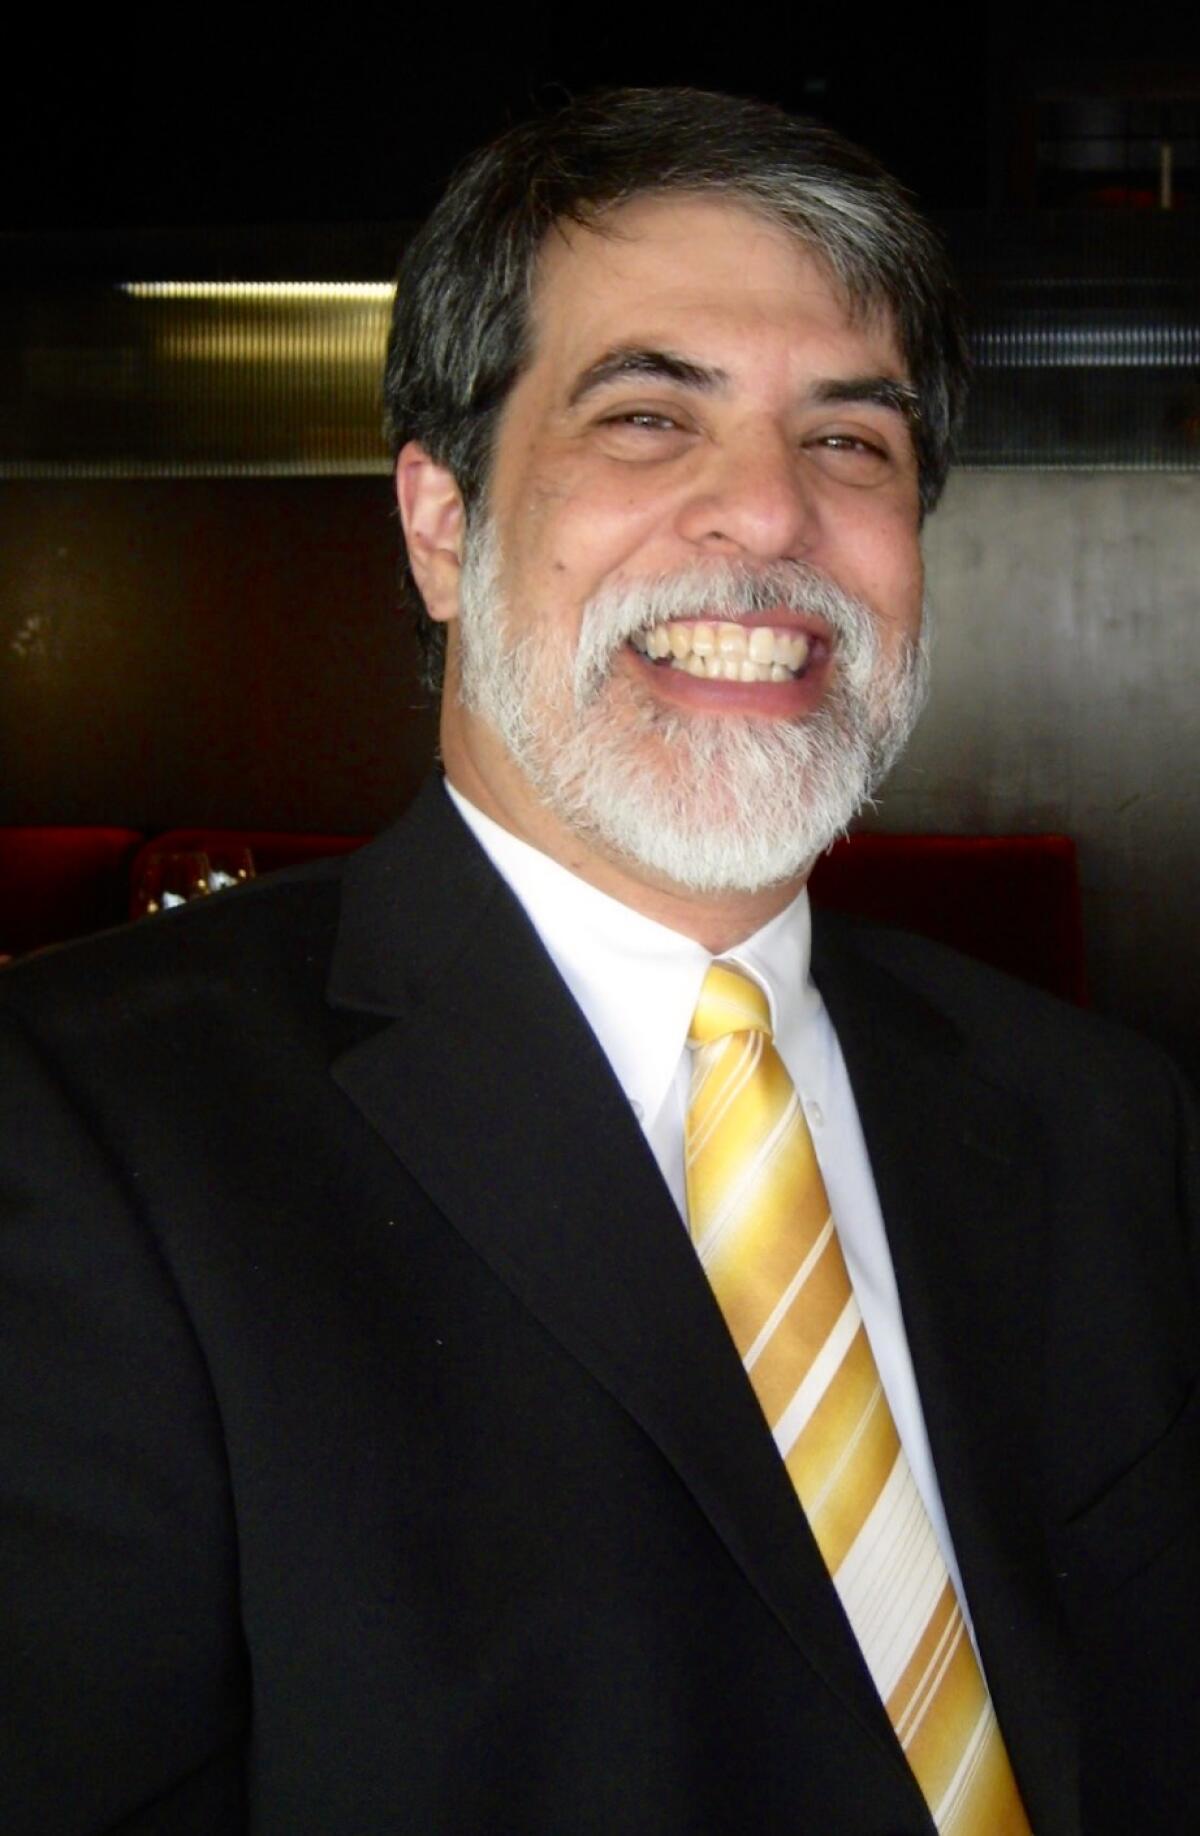 A man with black hair and white facial hair wears a black suit and yellow-stripe tie